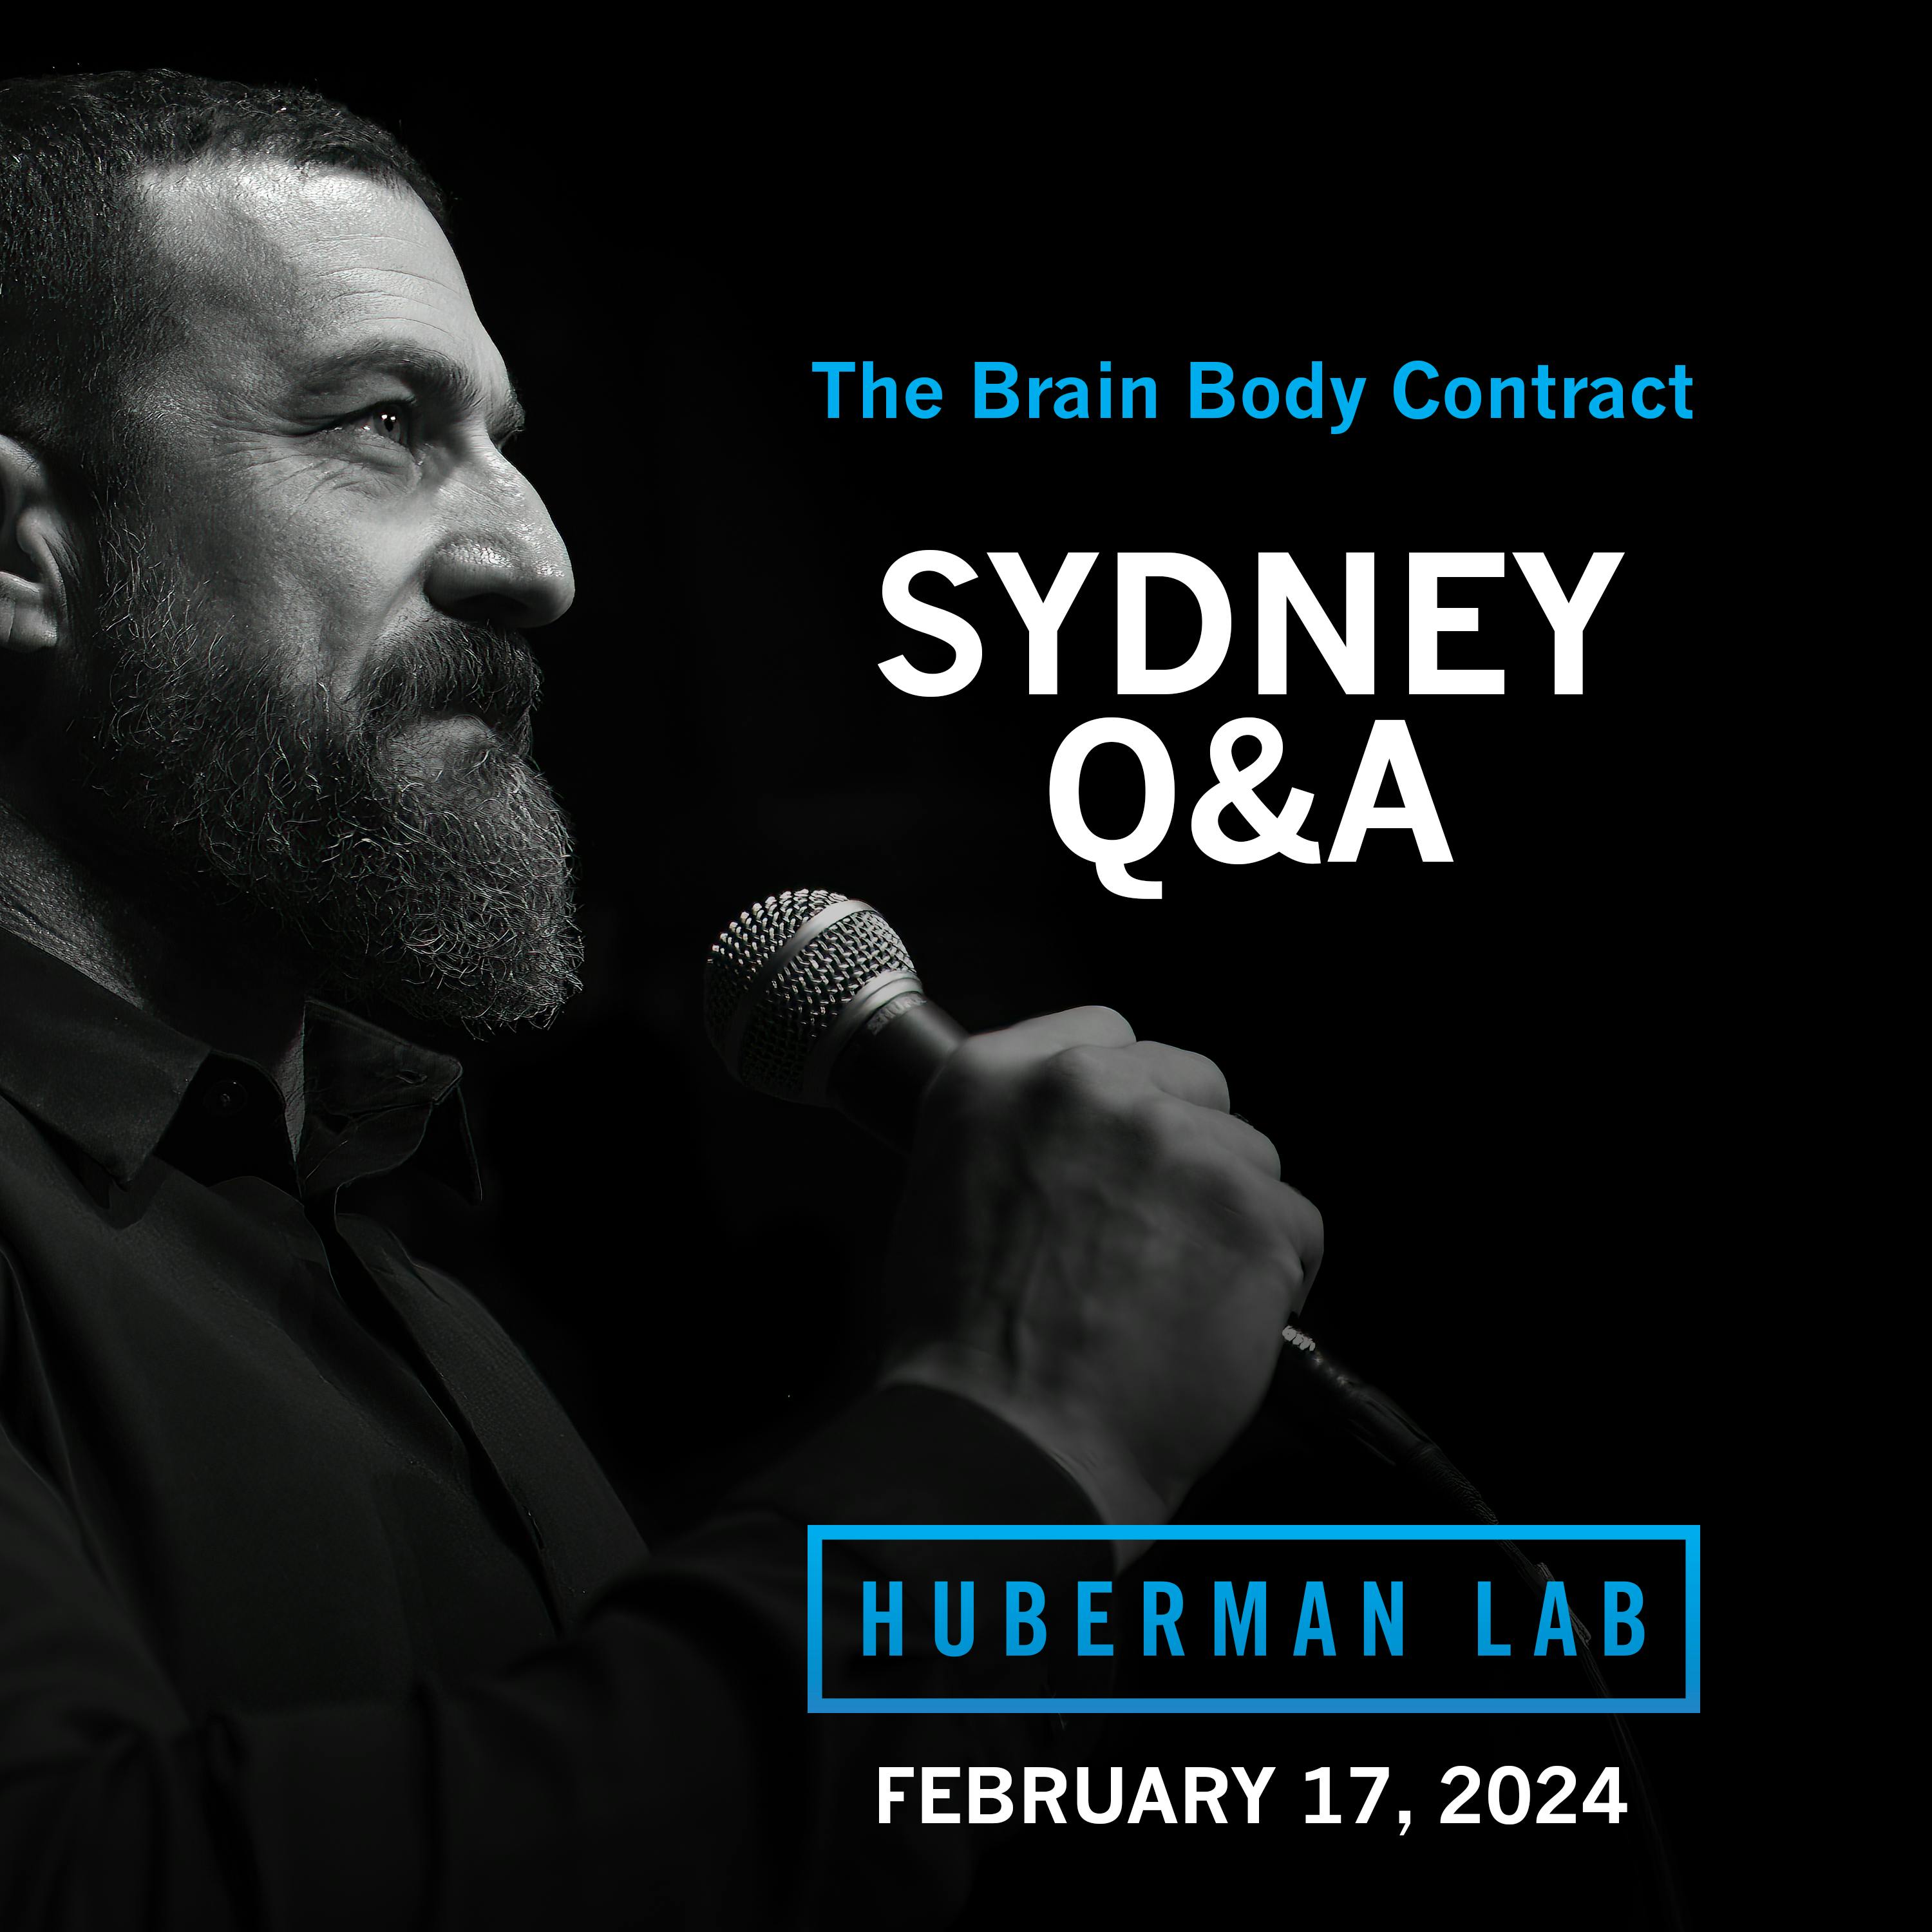 LIVE EVENT Q&A: Dr. Andrew Huberman at the Sydney Opera House by Scicomm Media